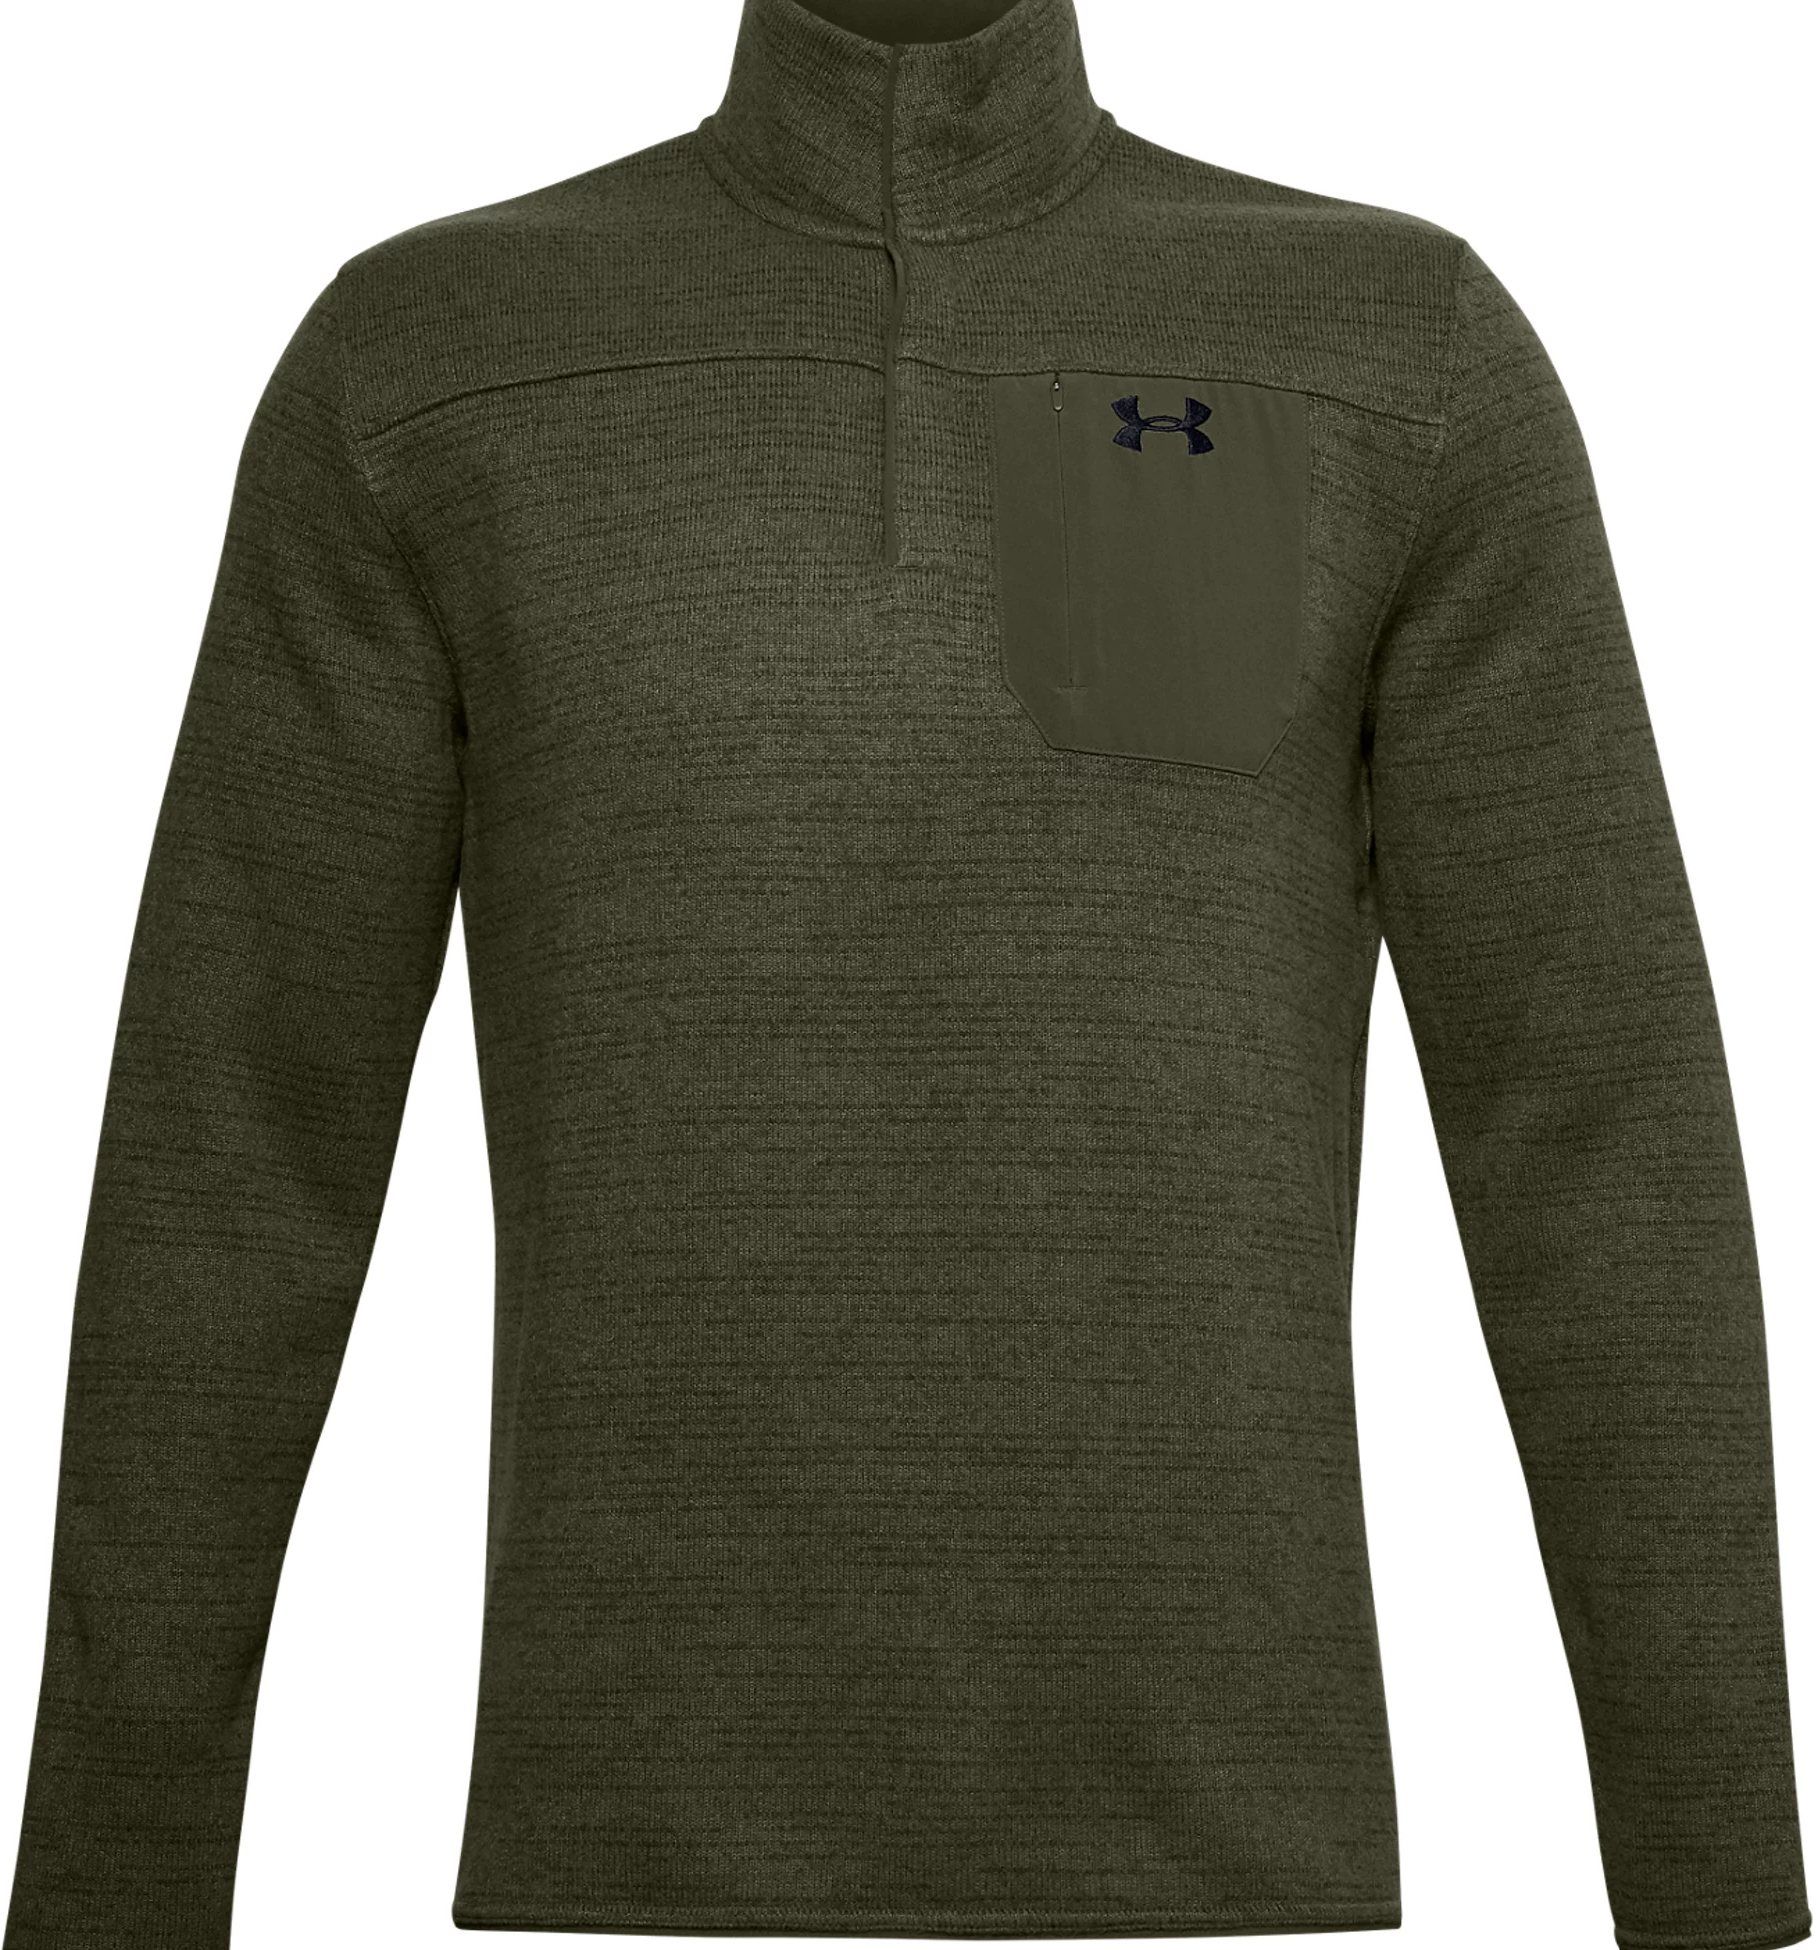 Under Armour Specialist Henley 2.0 Long Sleeve